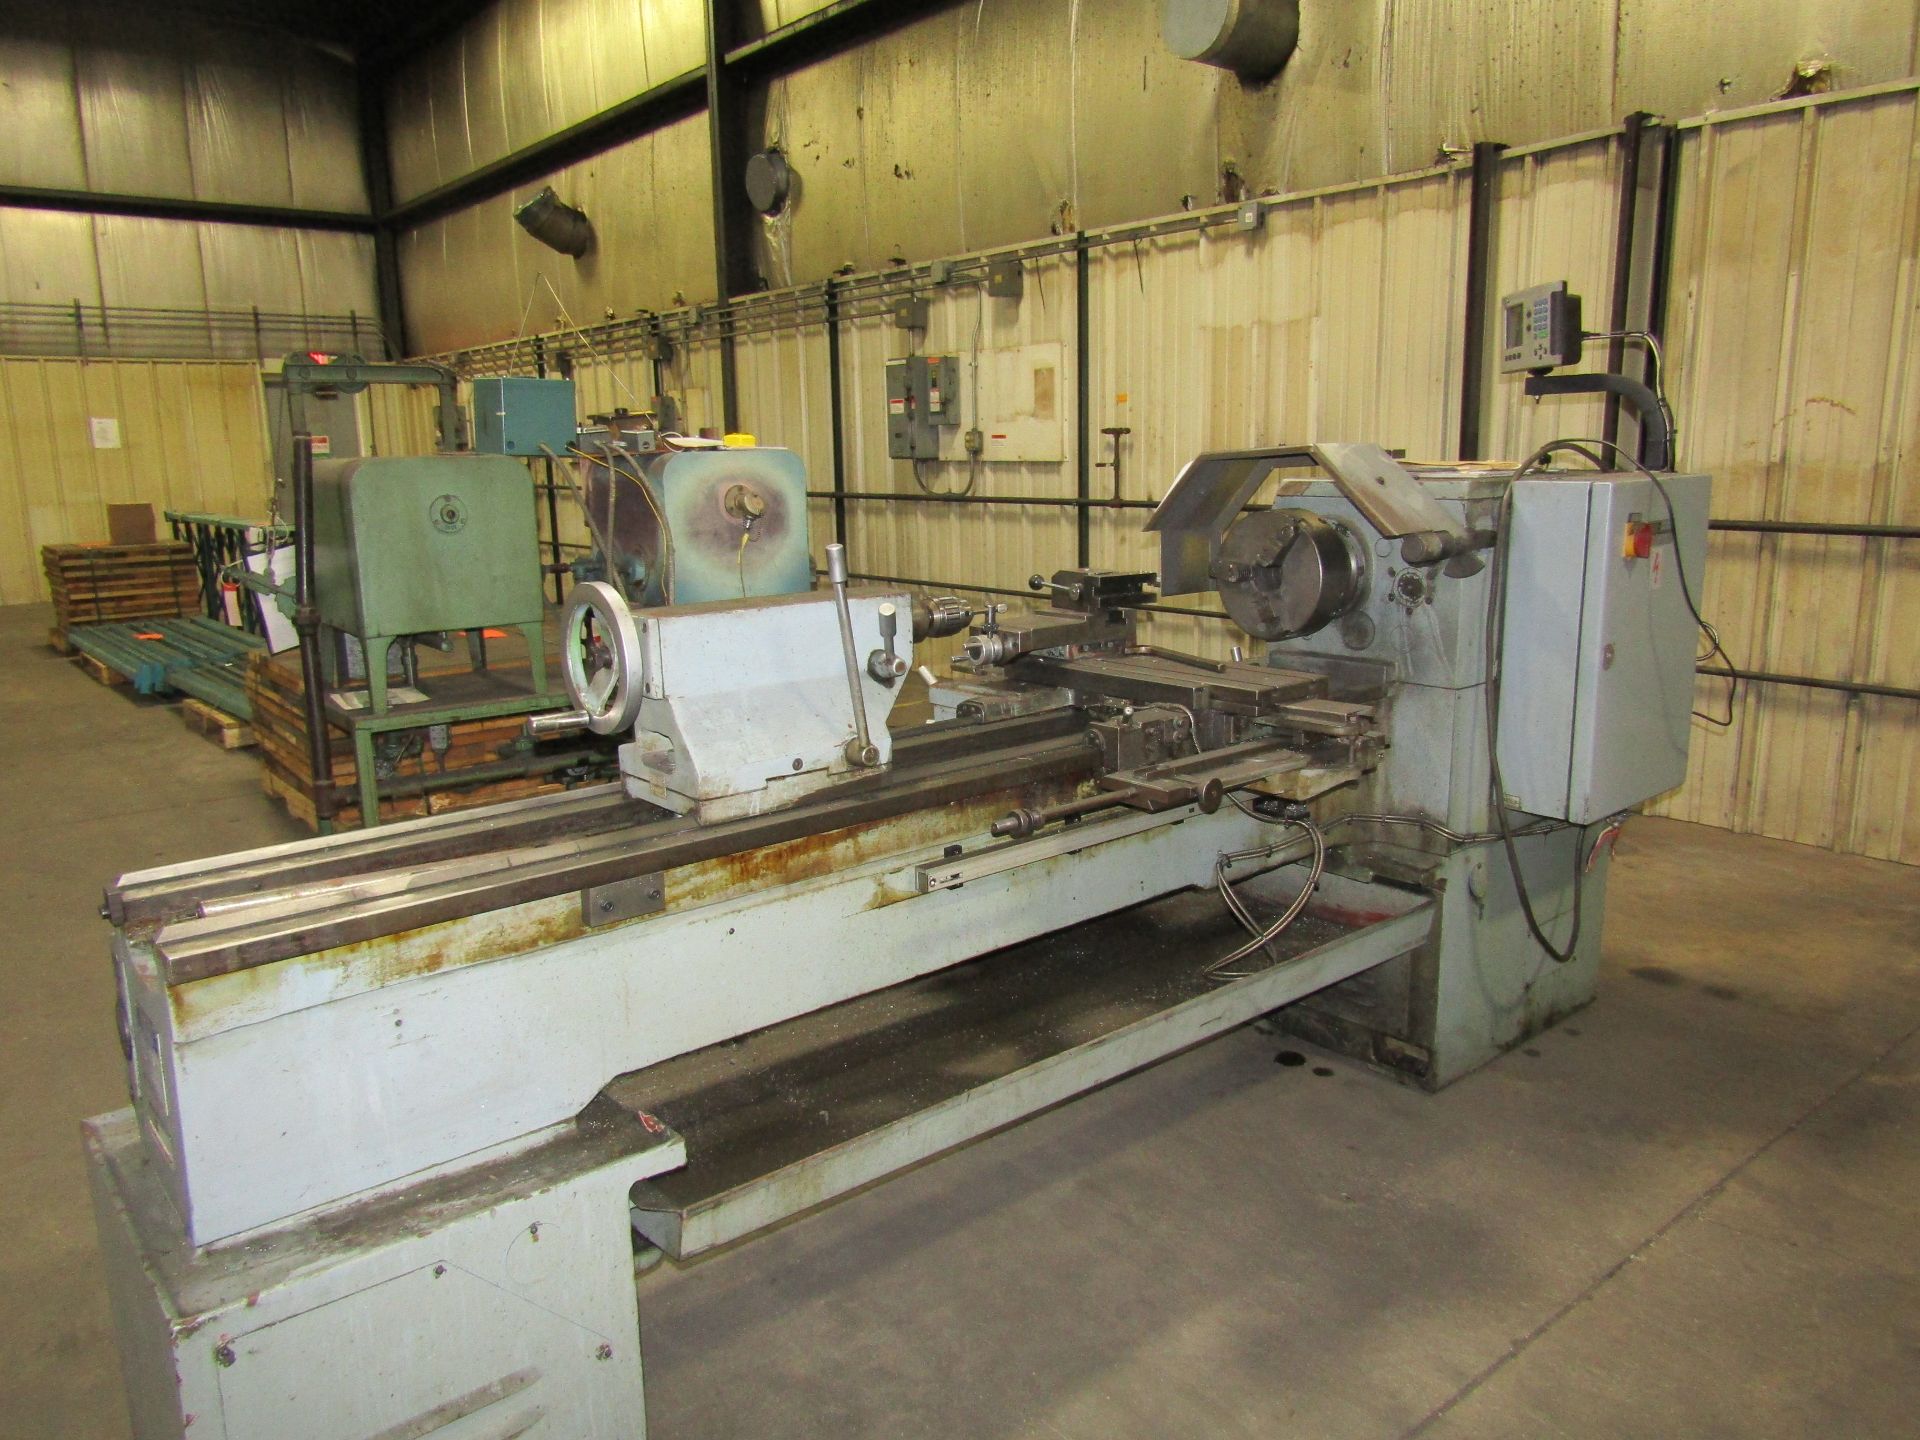 Andrychow Lathe M#: Tug-40, S#: 0691-7567 W/ Acurite DRO And 3-Jaw Chuck - Image 4 of 6